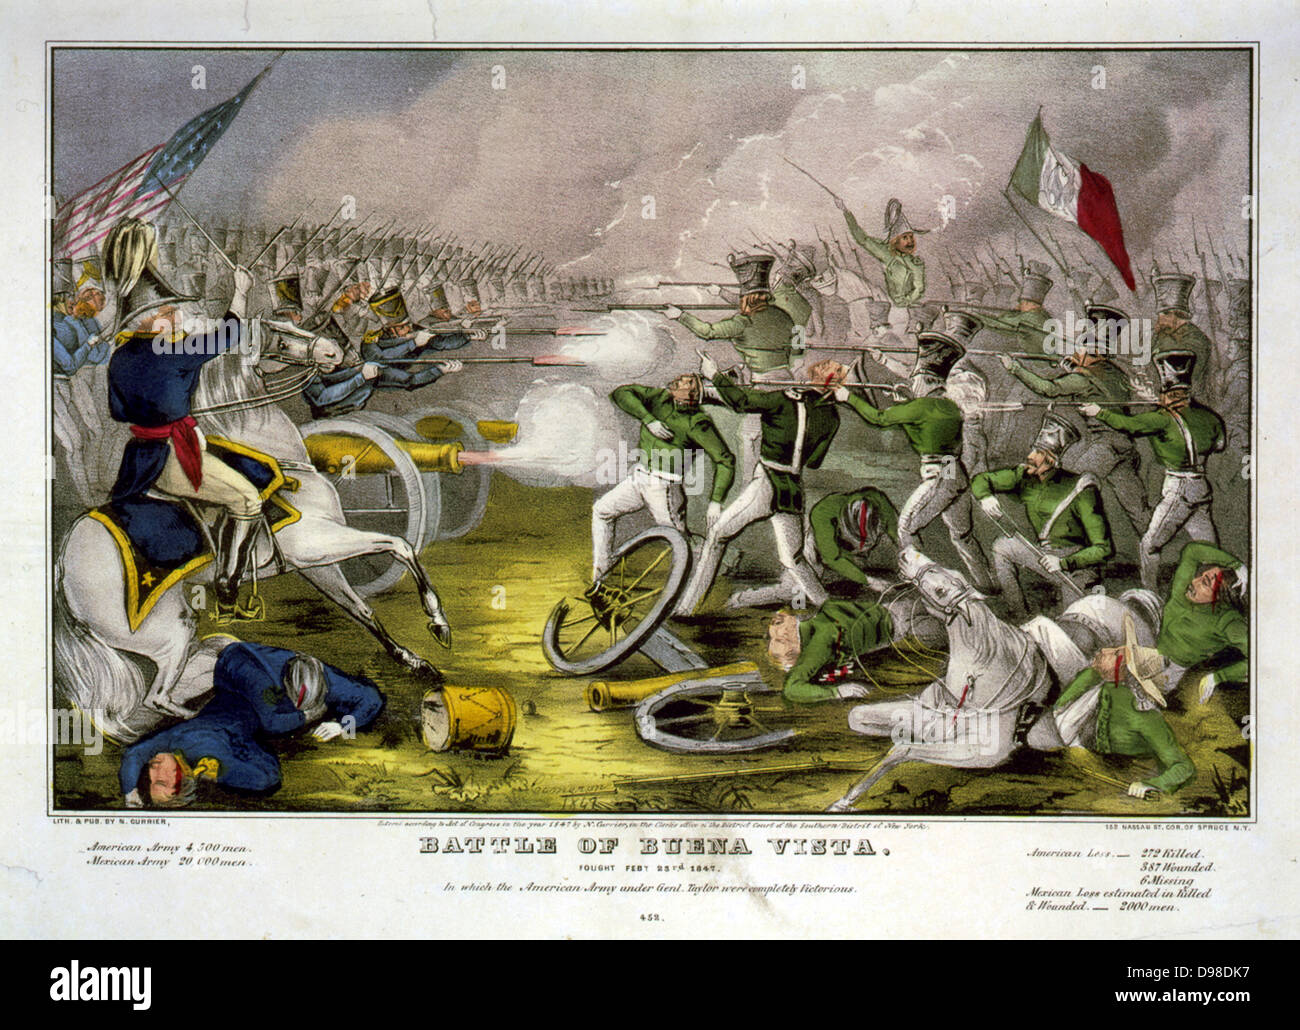 Mexican-American War 1846-1848: Battle of Buena Vista, also known as Battle of Angostura, 22-23 February 1847. Mexicans under Santa Anna, in green, defeated by the American under General Zachary Taylor. Hand-coloured engraving. Stock Photo